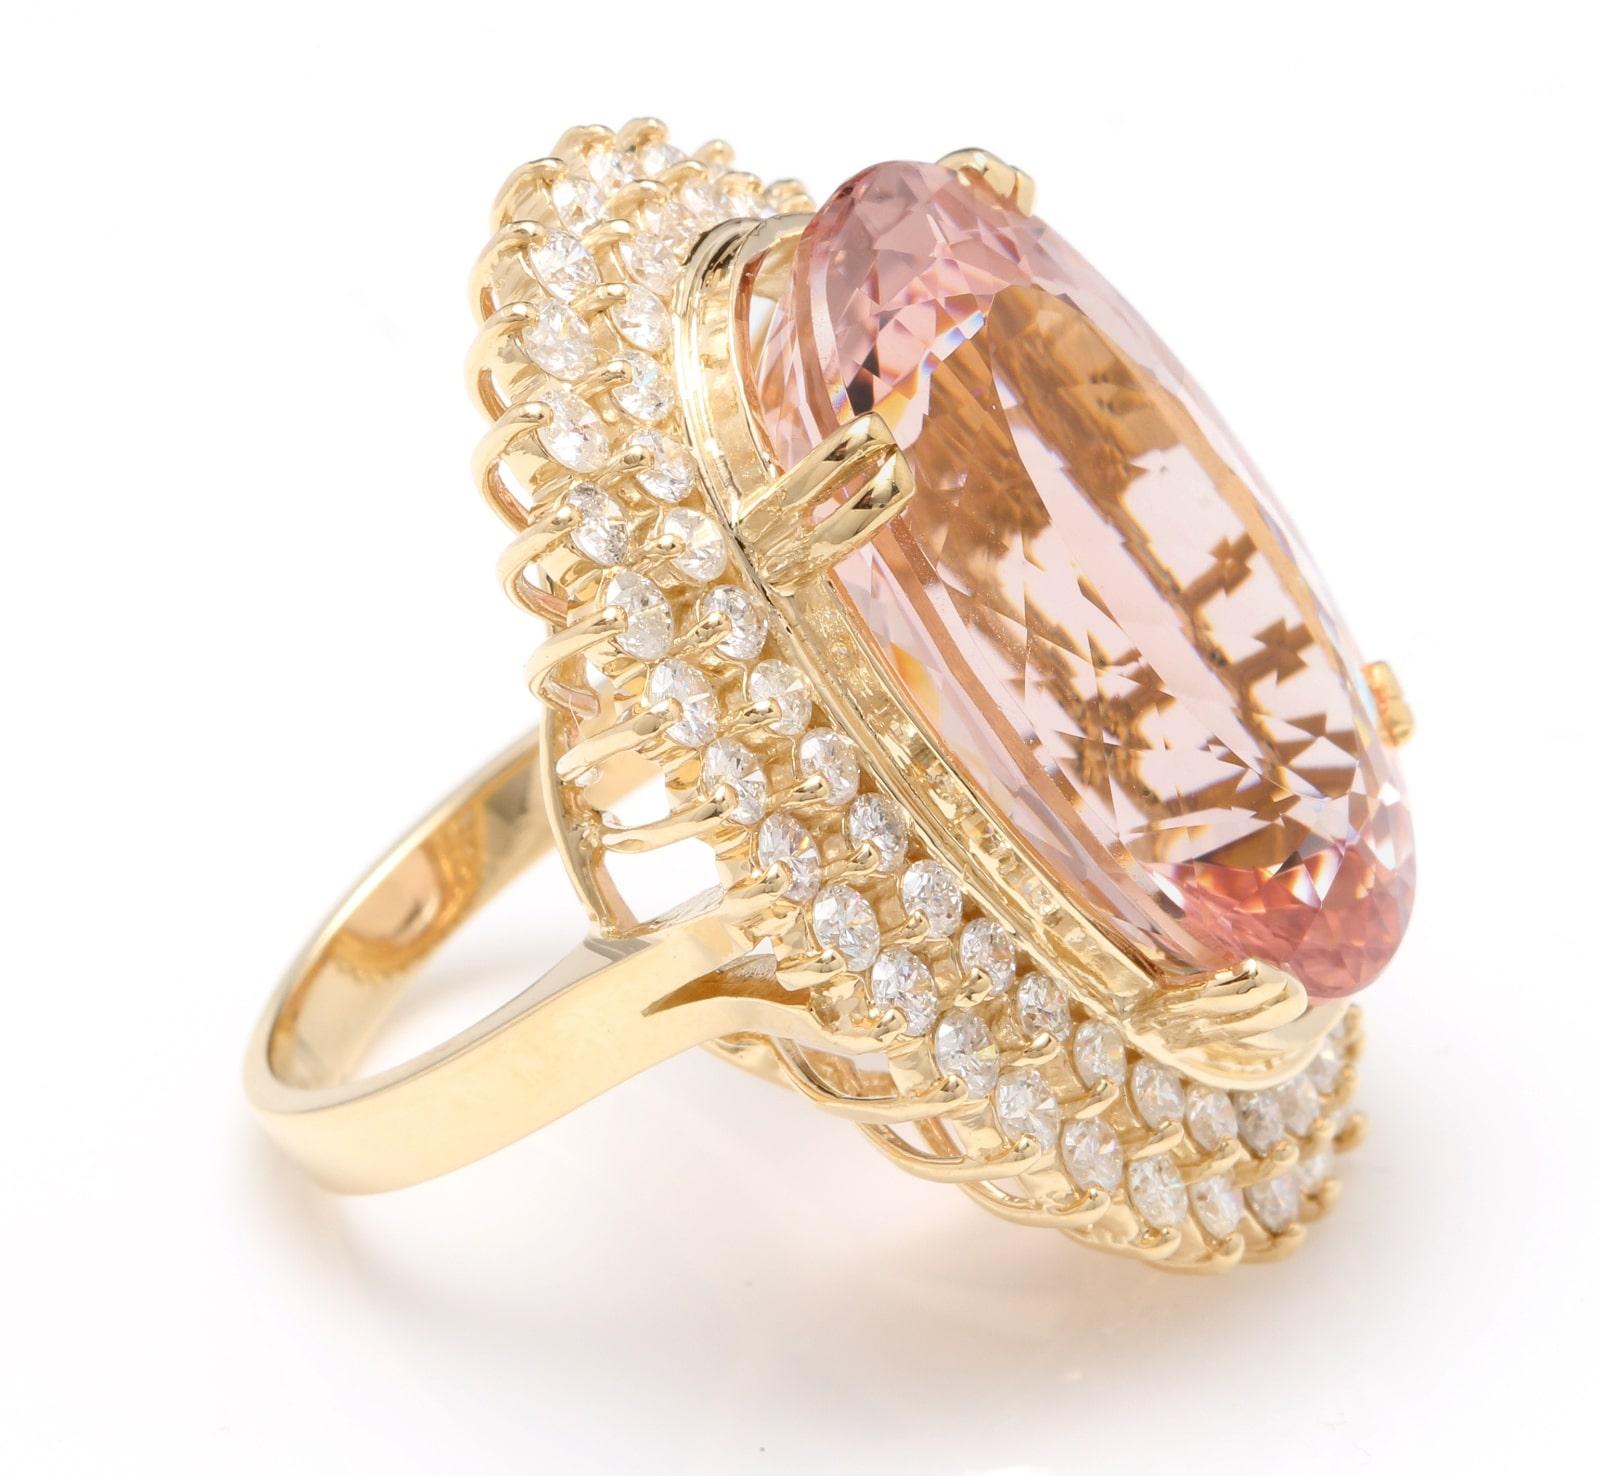 Mixed Cut 36.25 Carats Exquisite Natural Morganite and Diamond 14K Solid Yellow Gold Ring For Sale